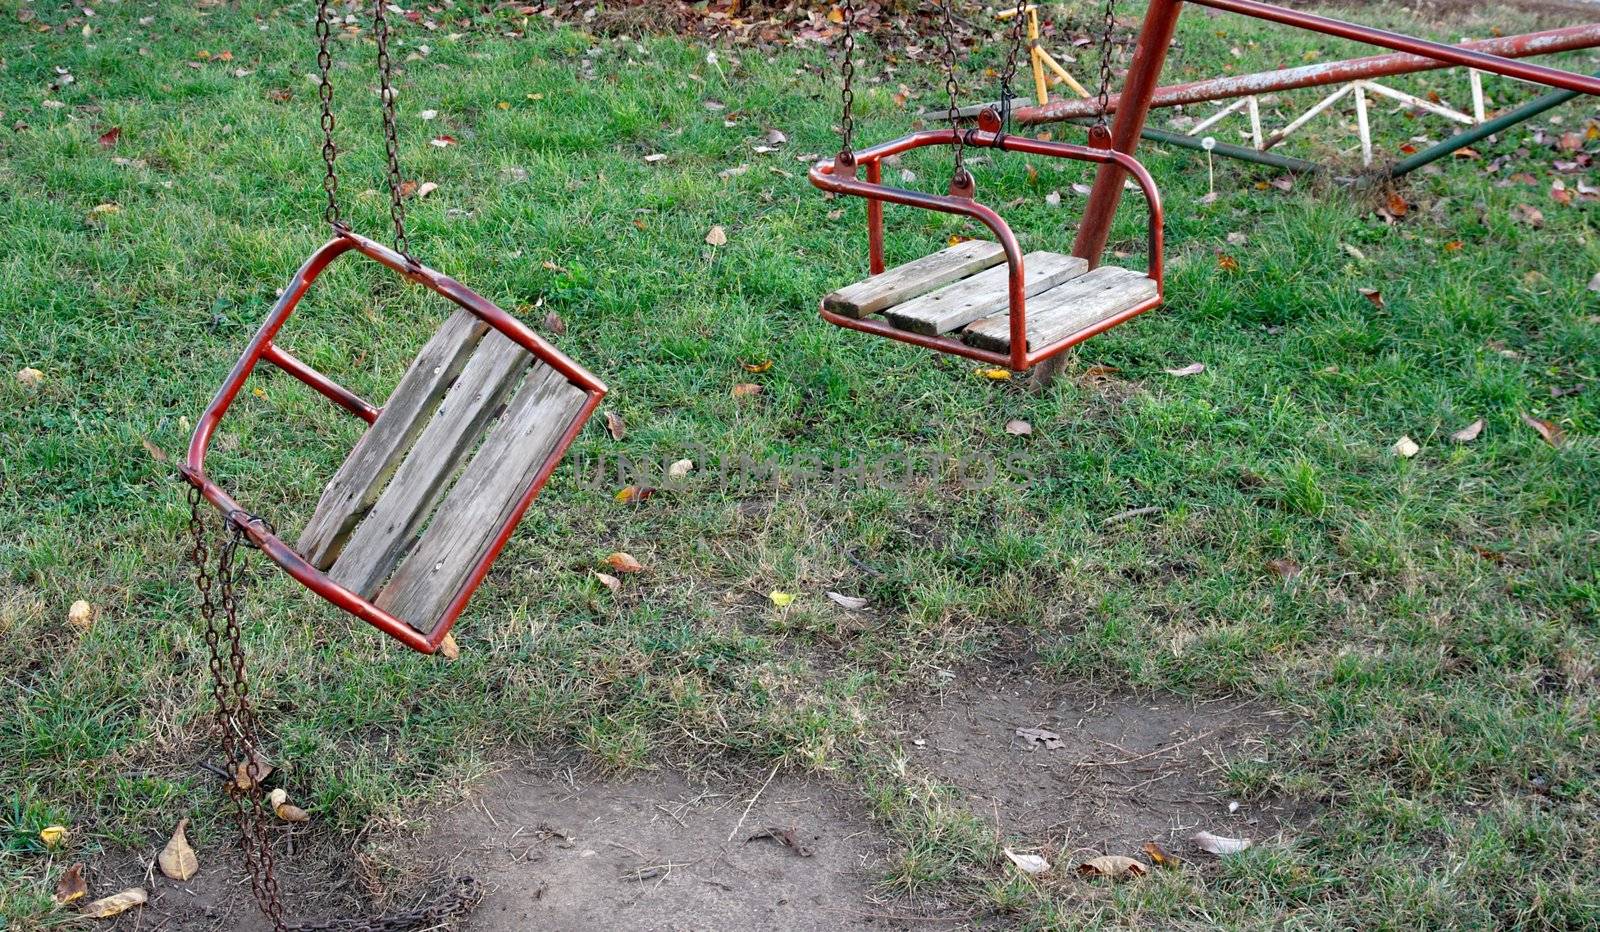 Two swings on a playground, one broken